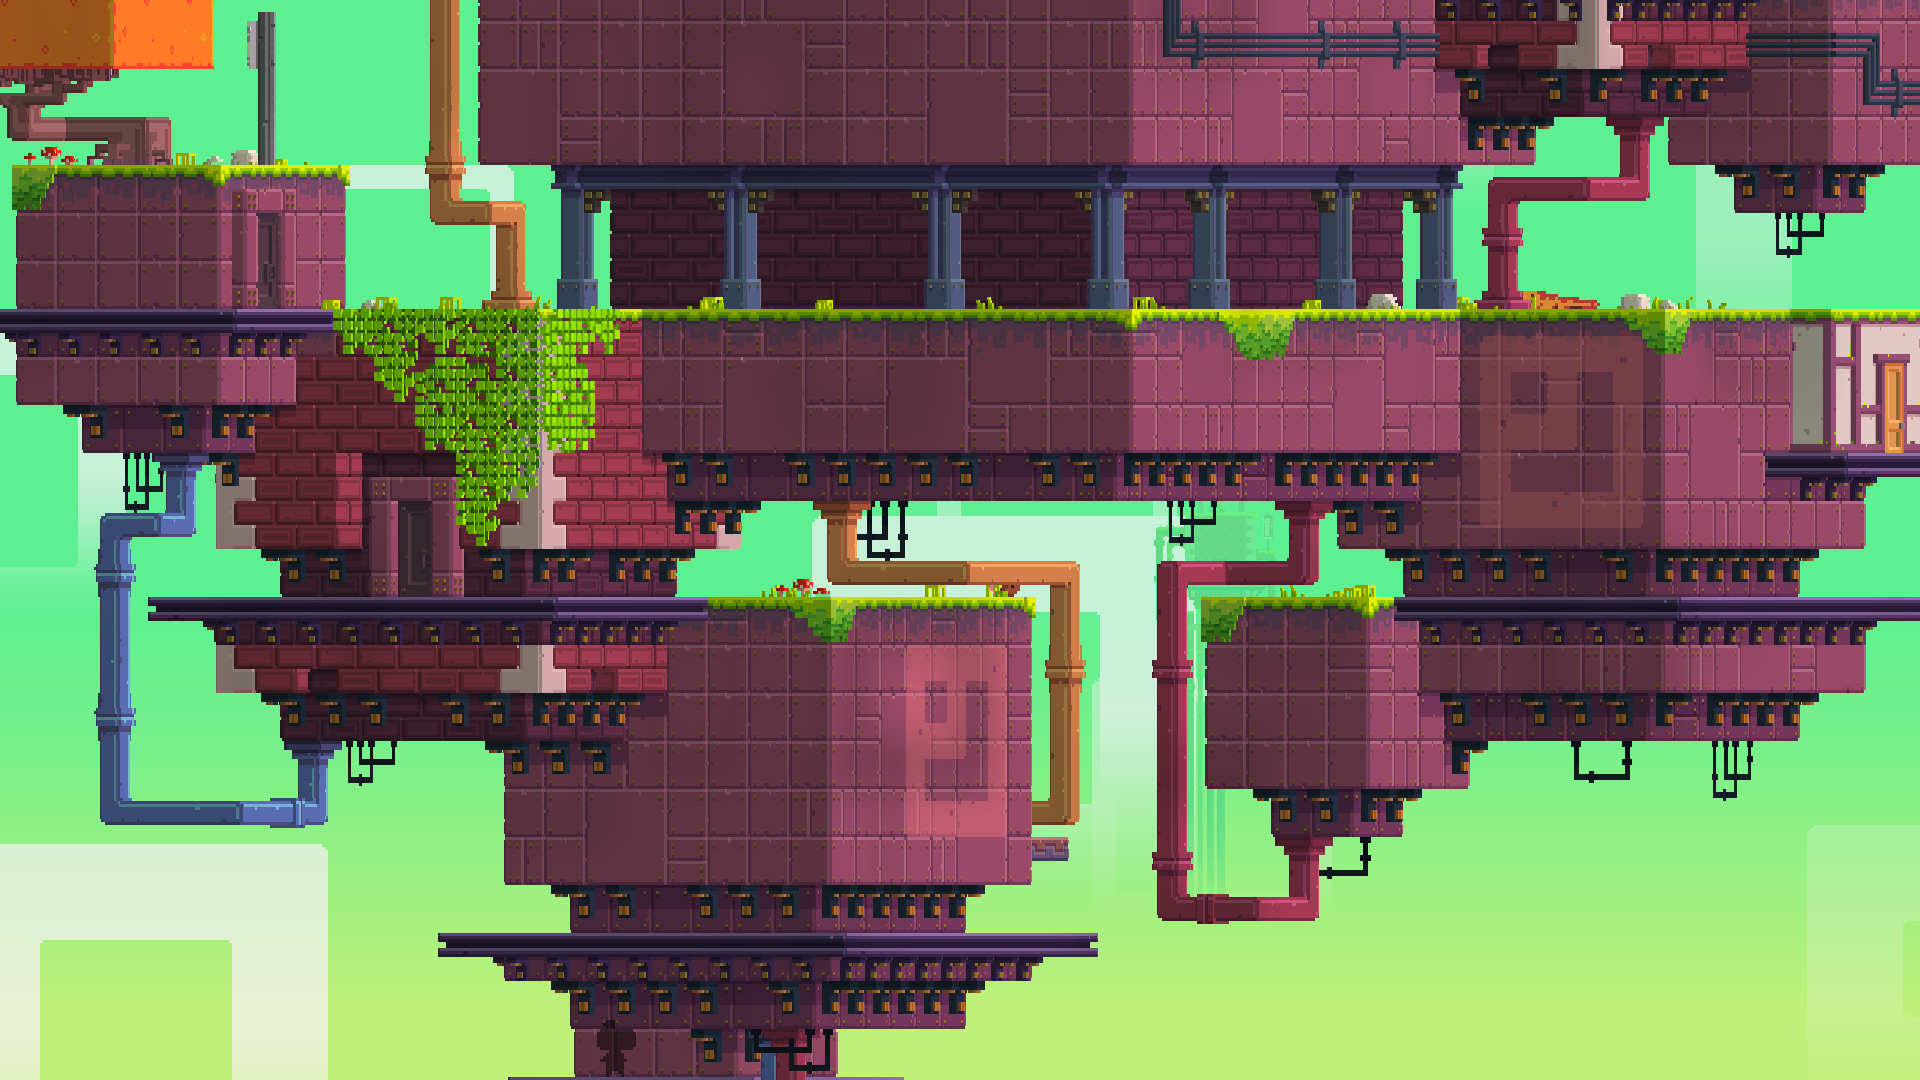 fez-2013-06-28-22-27-39-51.png